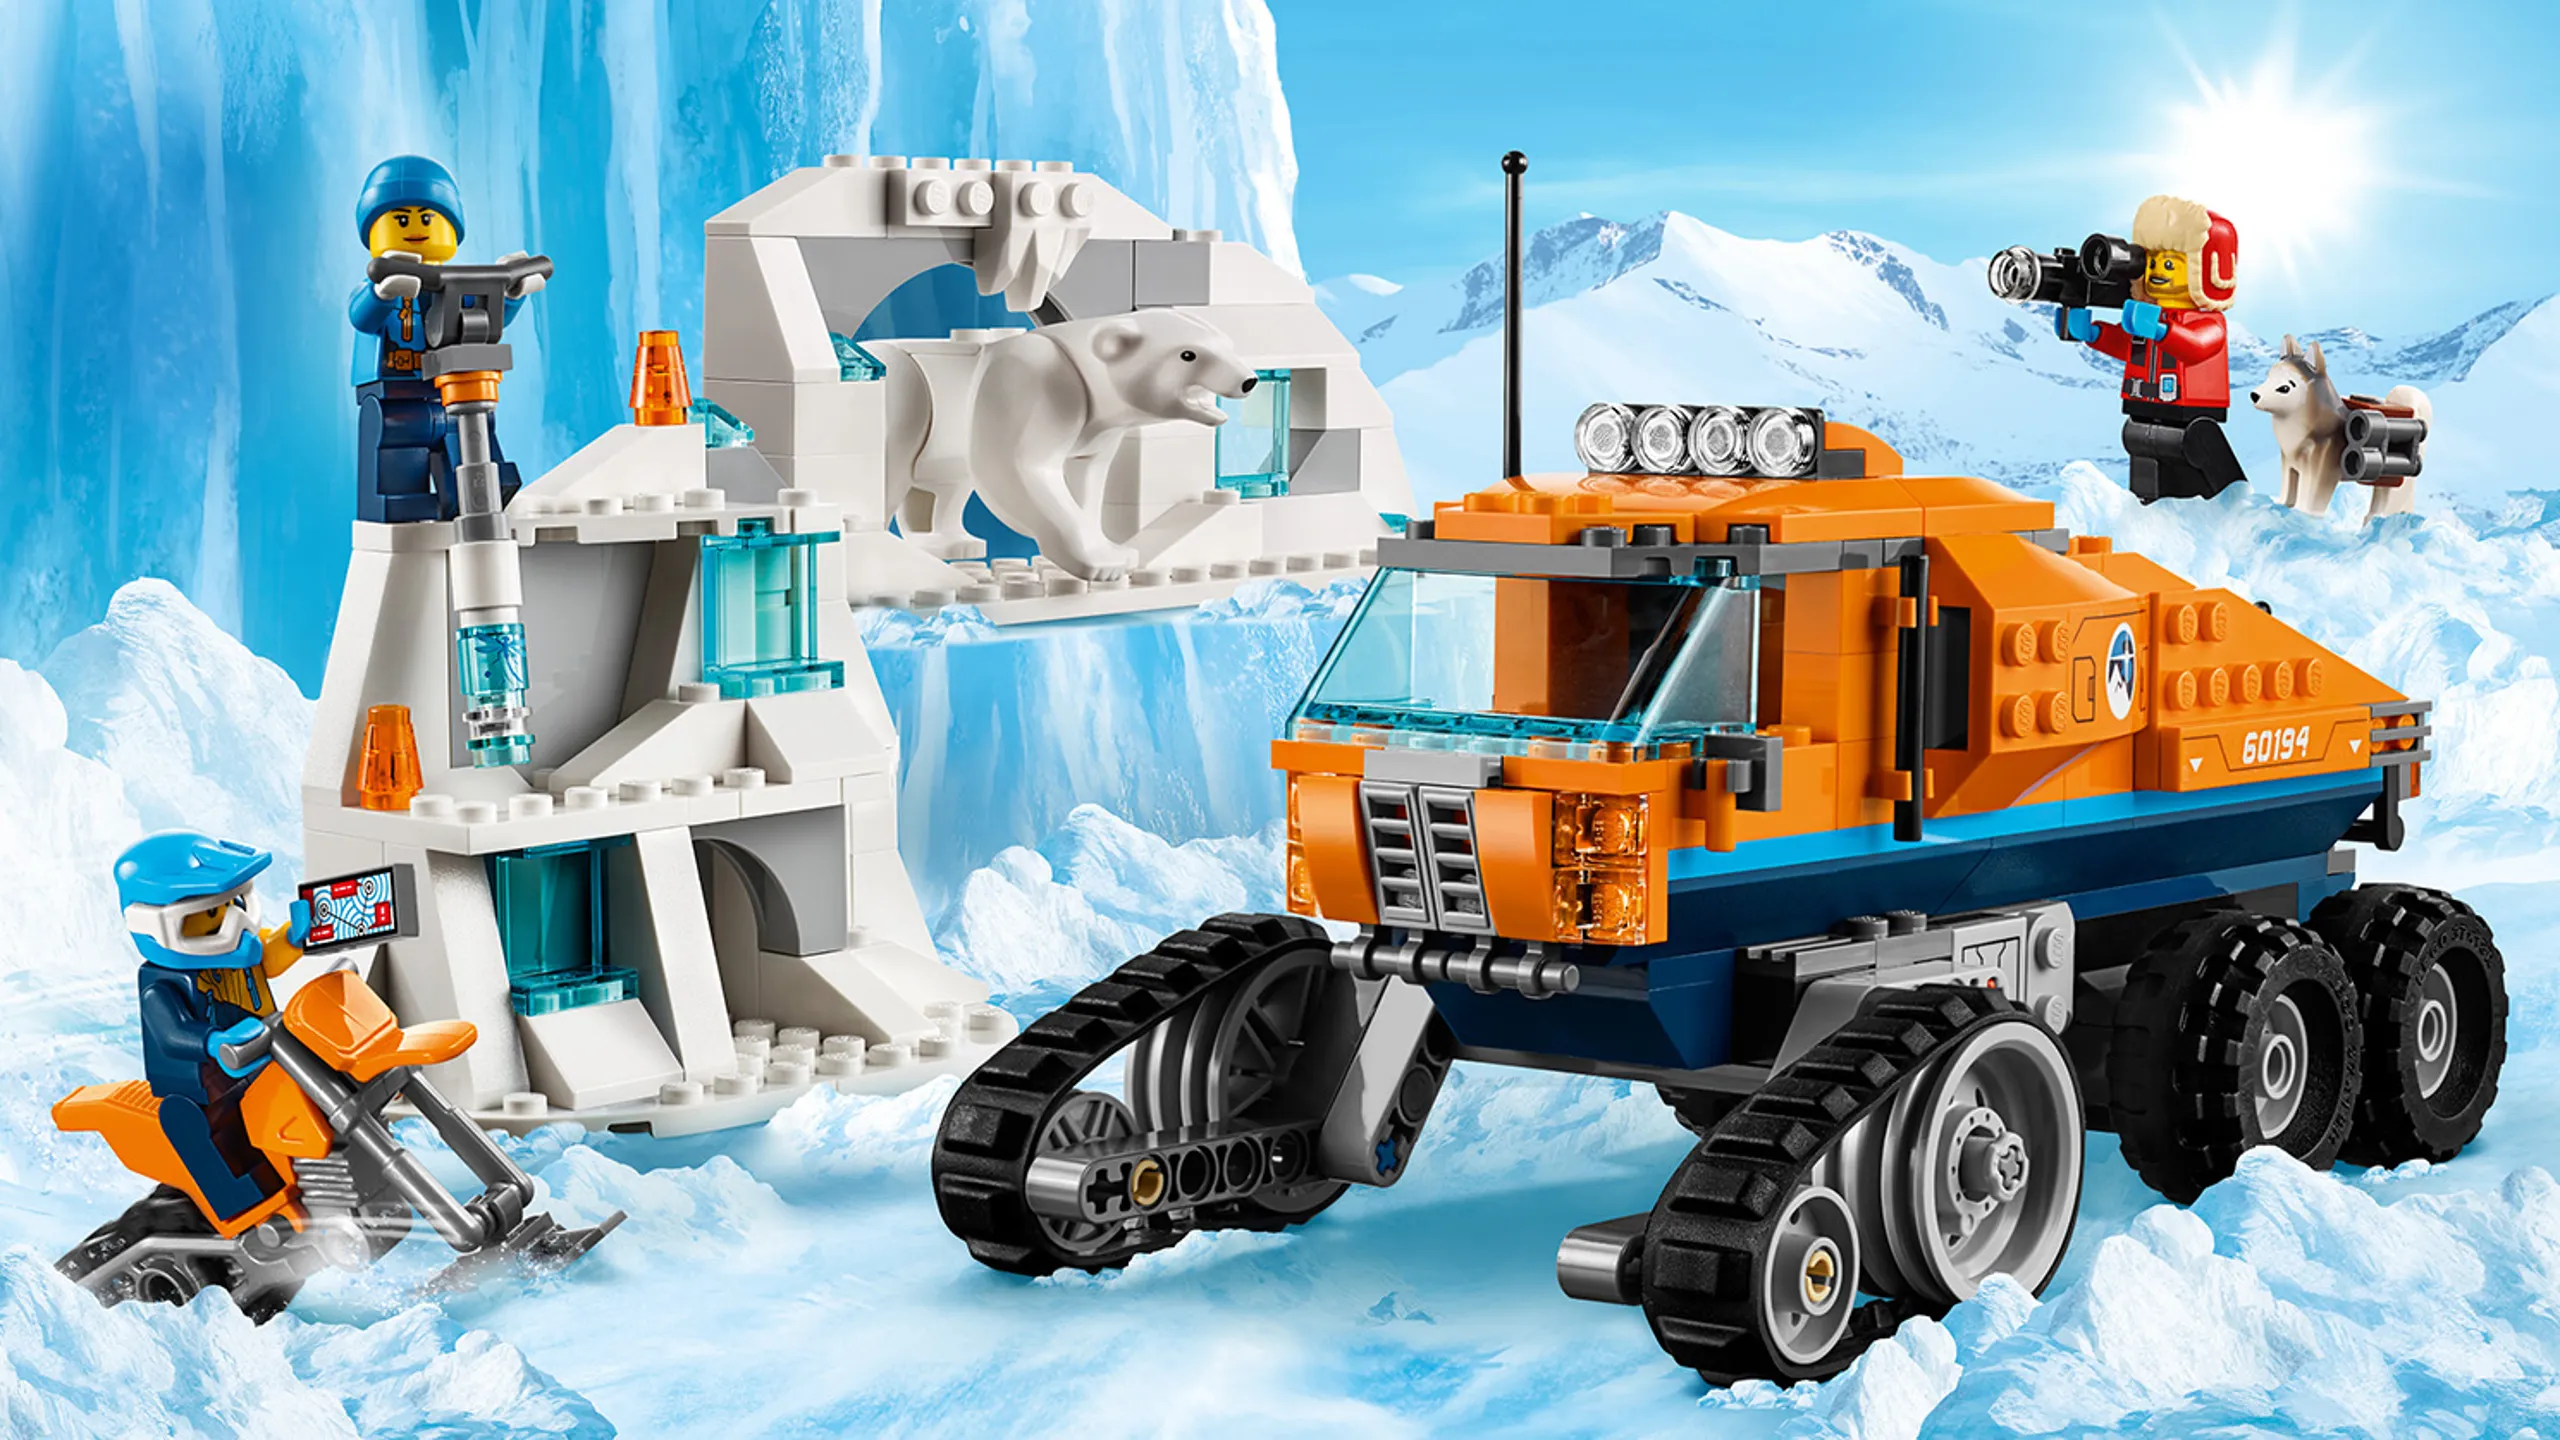 LEGO City Arctic Expedition - 60194 Arctic Scout Truck - A photographer is out with his dog, a worker drills in an iceberg with tools from the big orange vehicle, a polar bear live in the iceberg and another worker is on a snowmobile.